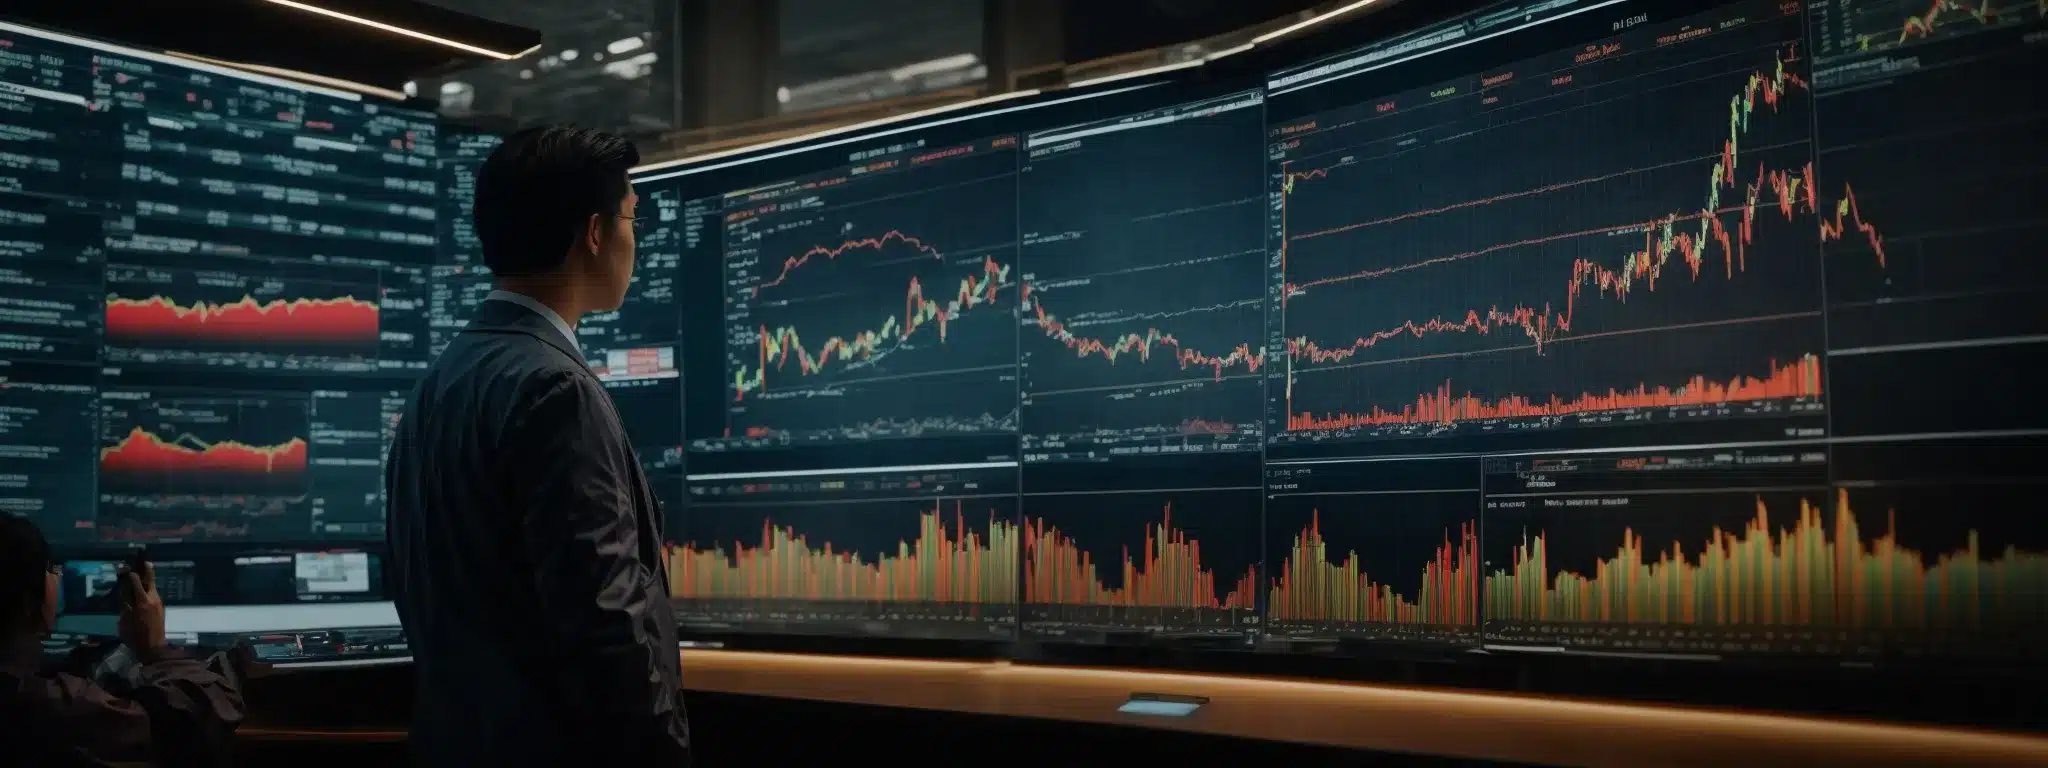 A Person Examines A Large, Vibrant Stock Market Dashboard Reflecting The Dynamic Ups And Downs Of The Financial World.